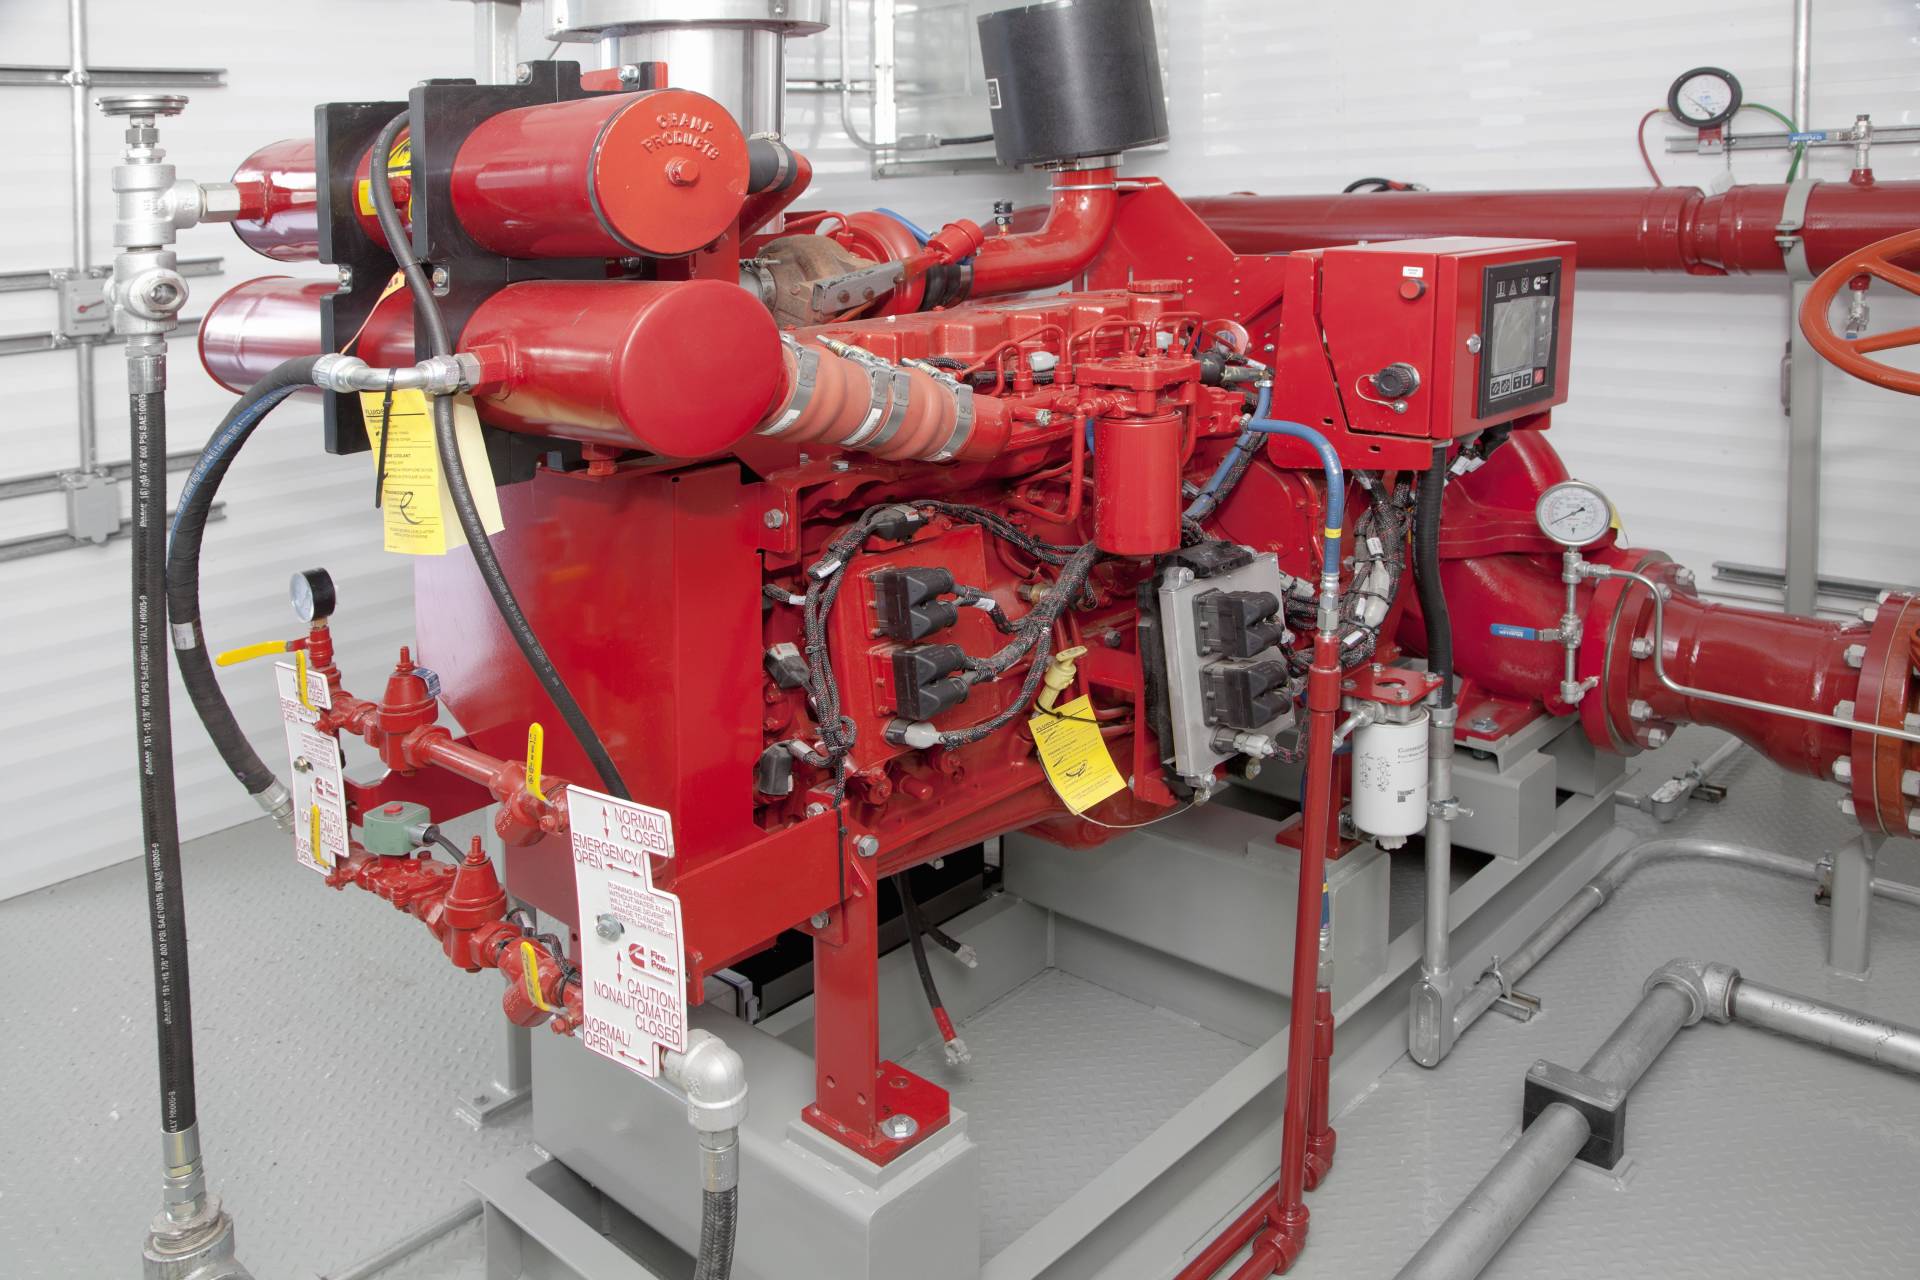 A Chamco fire pump system.